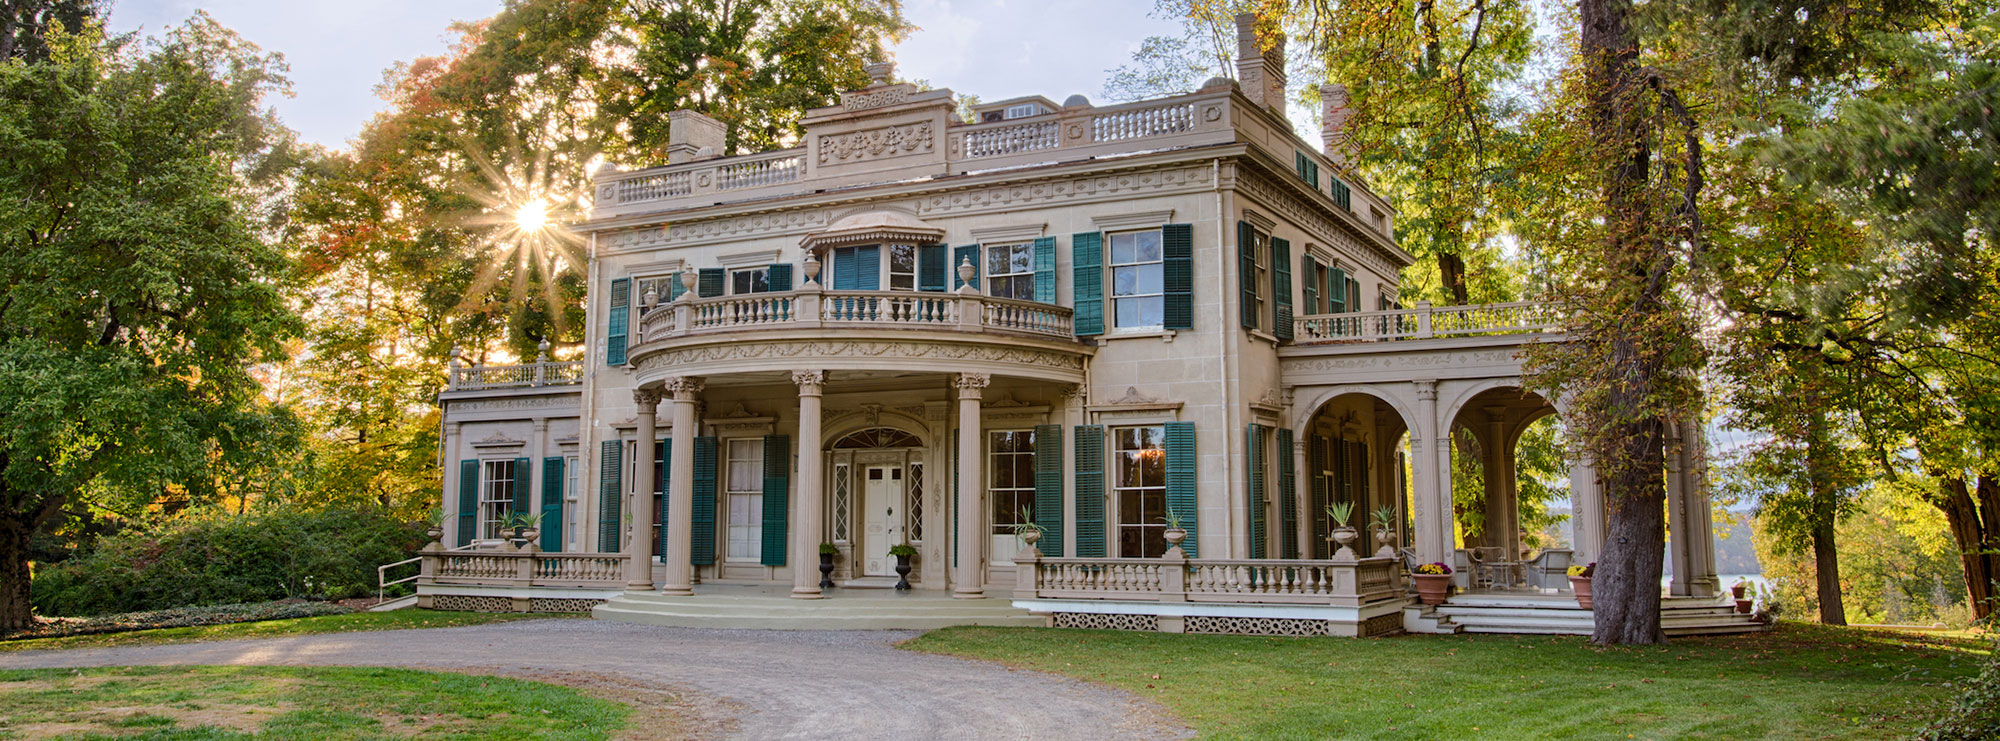 Montgomery Place Mansion